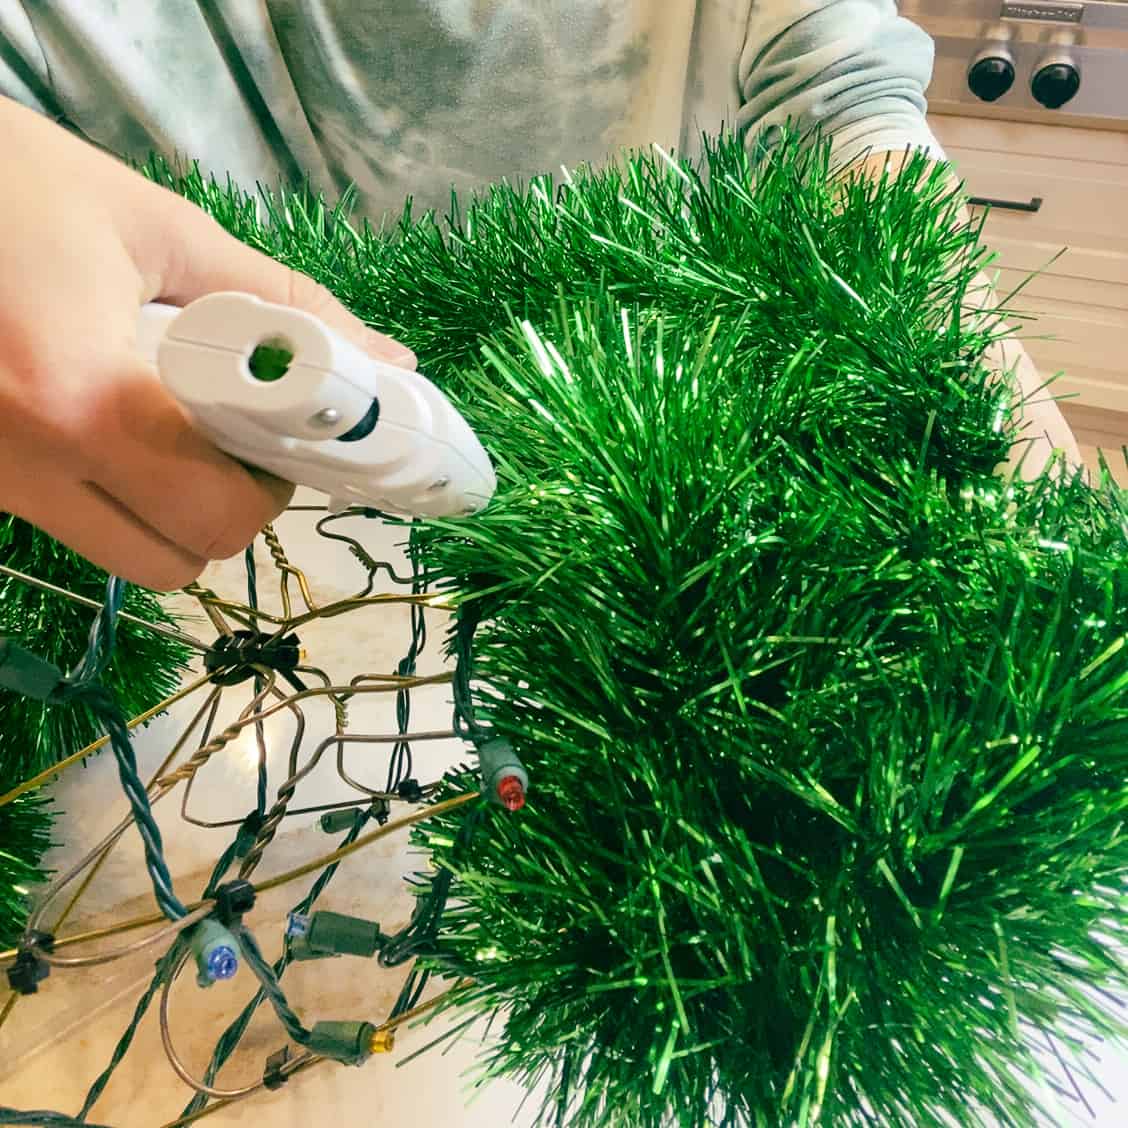 Using a hot glue gun to attach the garland to the wire hanger Christmas tree.